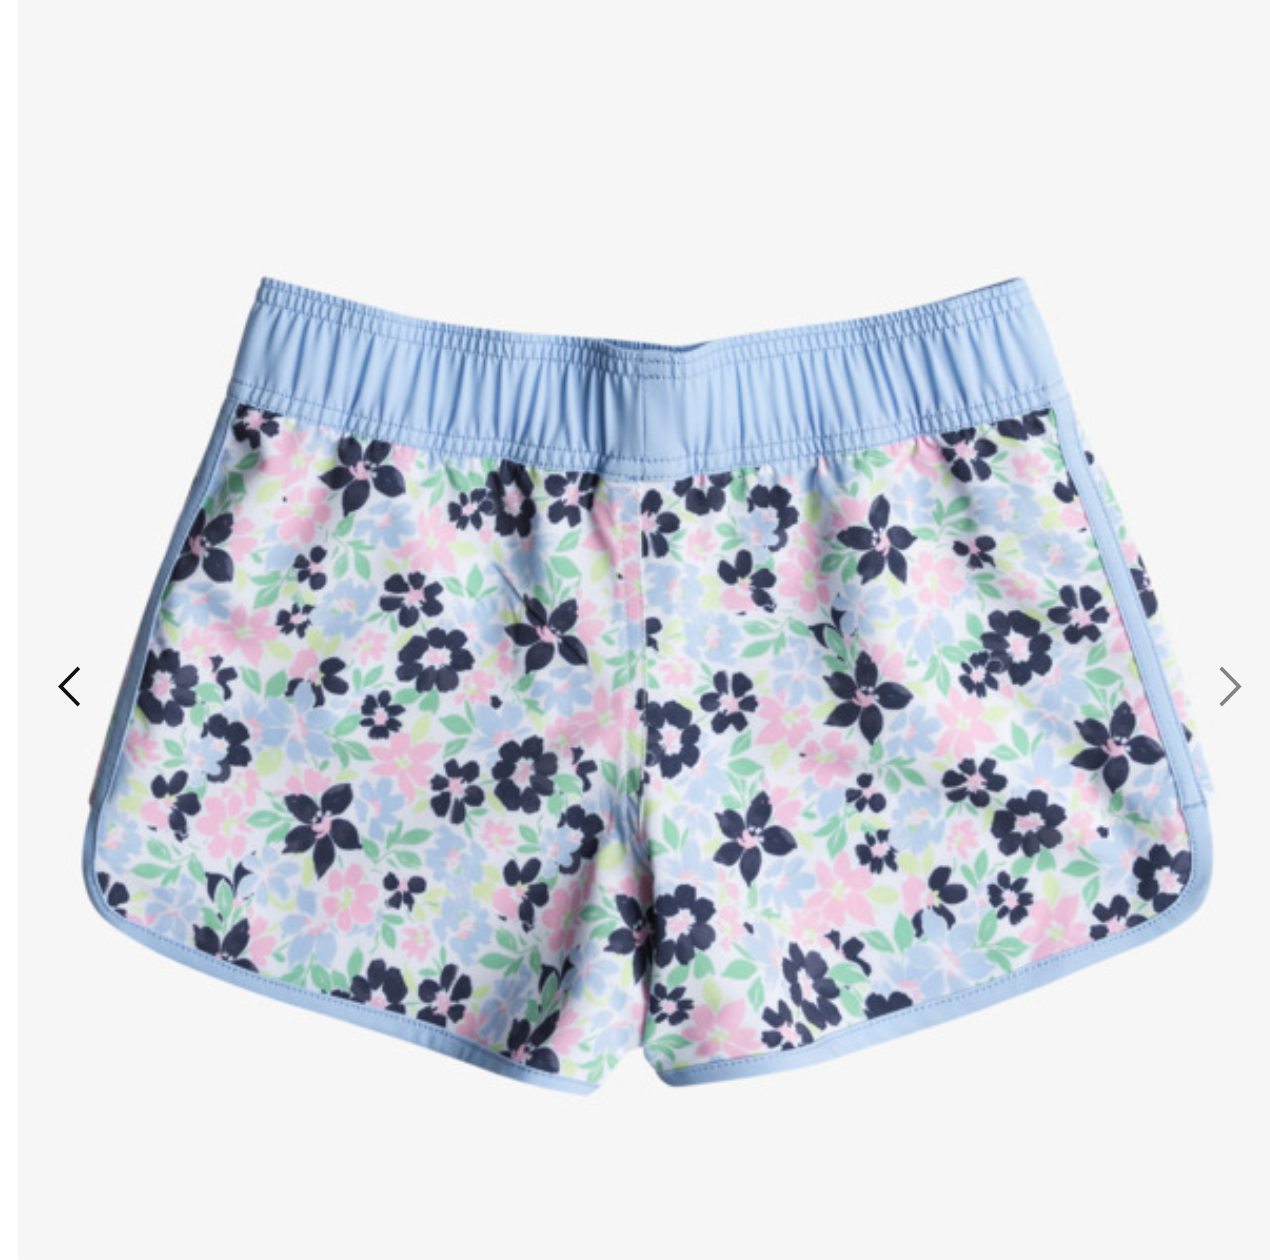 ROXY Good Waves Only - Swim Shorts for Girls 6-16